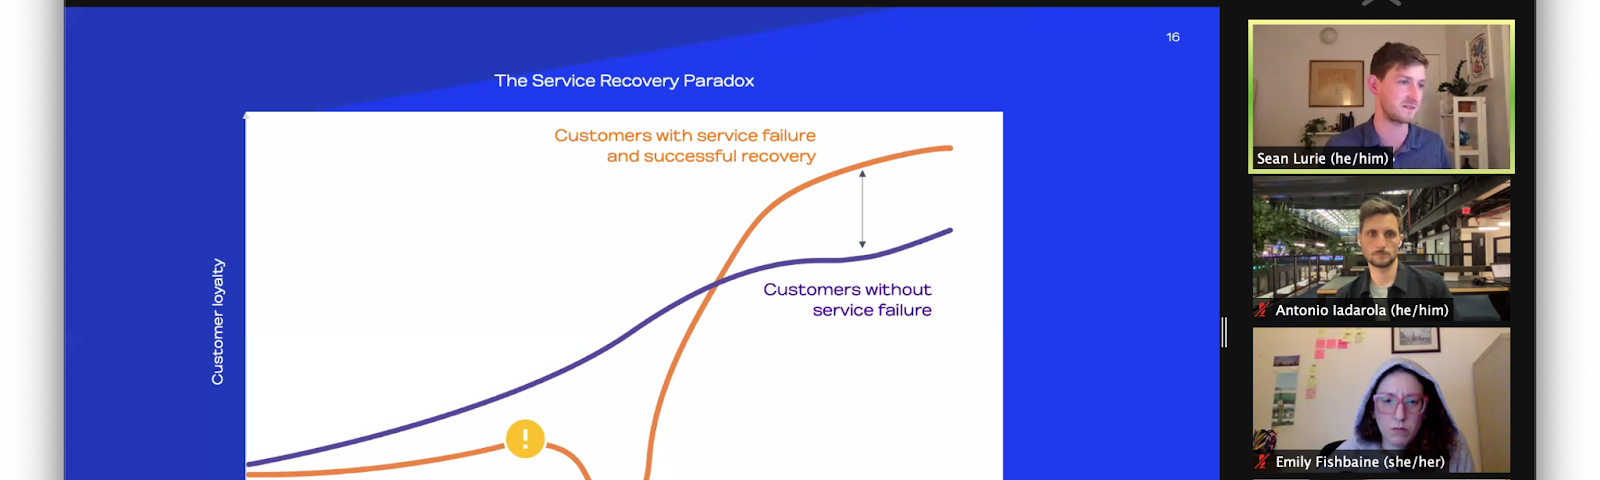 Zoom screenshot of chart depicting the service recovery paradox with four participants visible